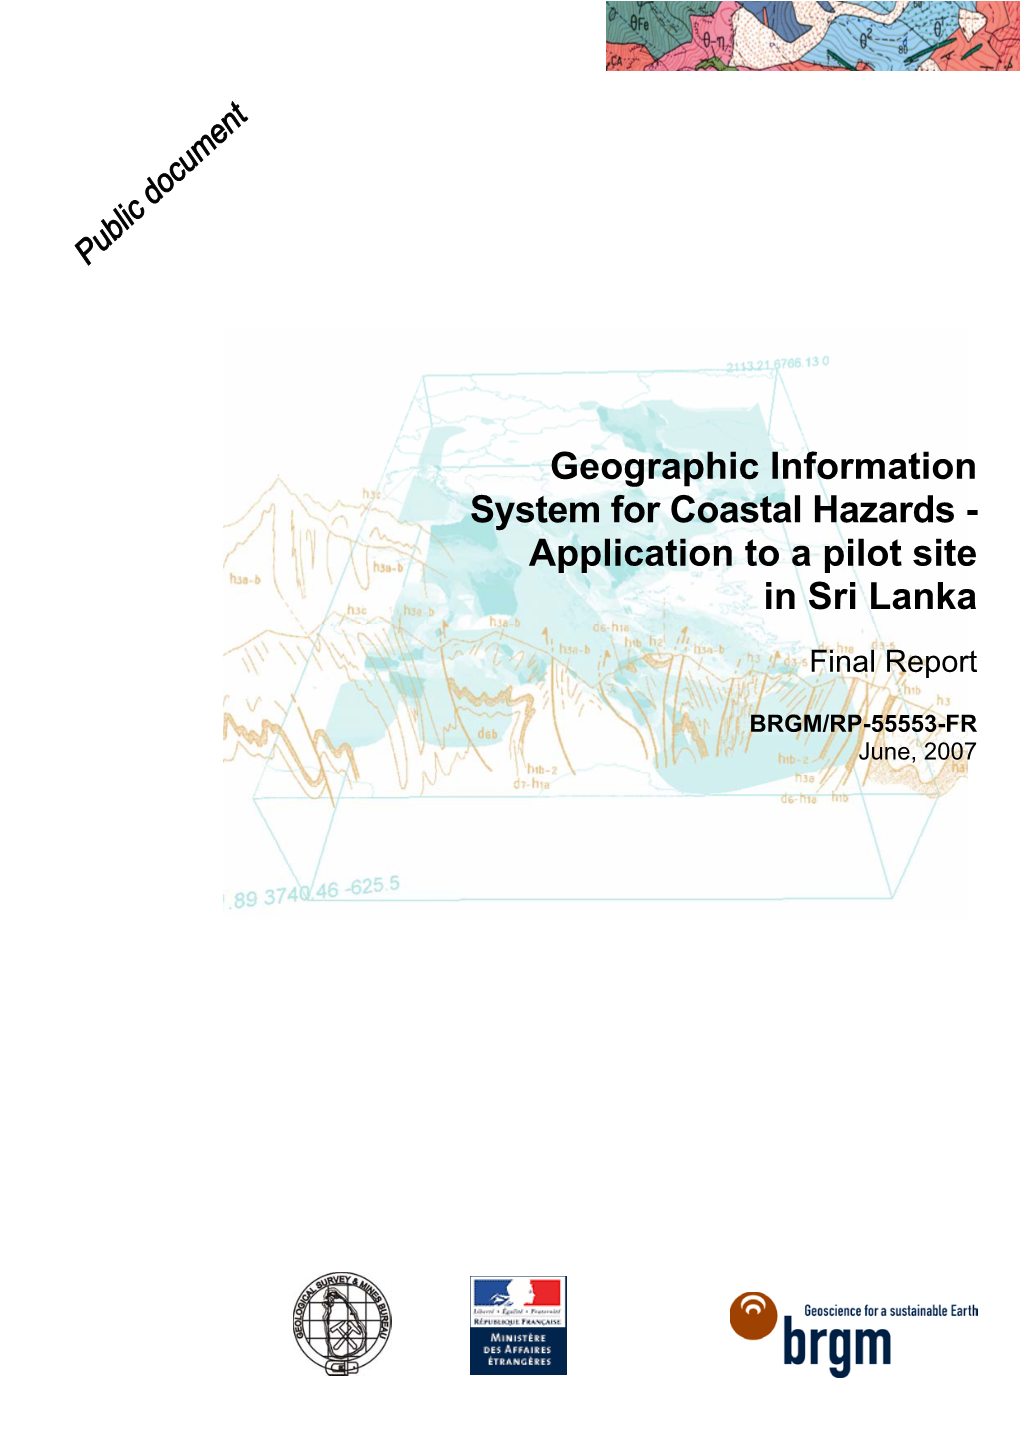 Geographic Information System for Coastal Hazards - Application to a Pilot Site in Sri Lanka